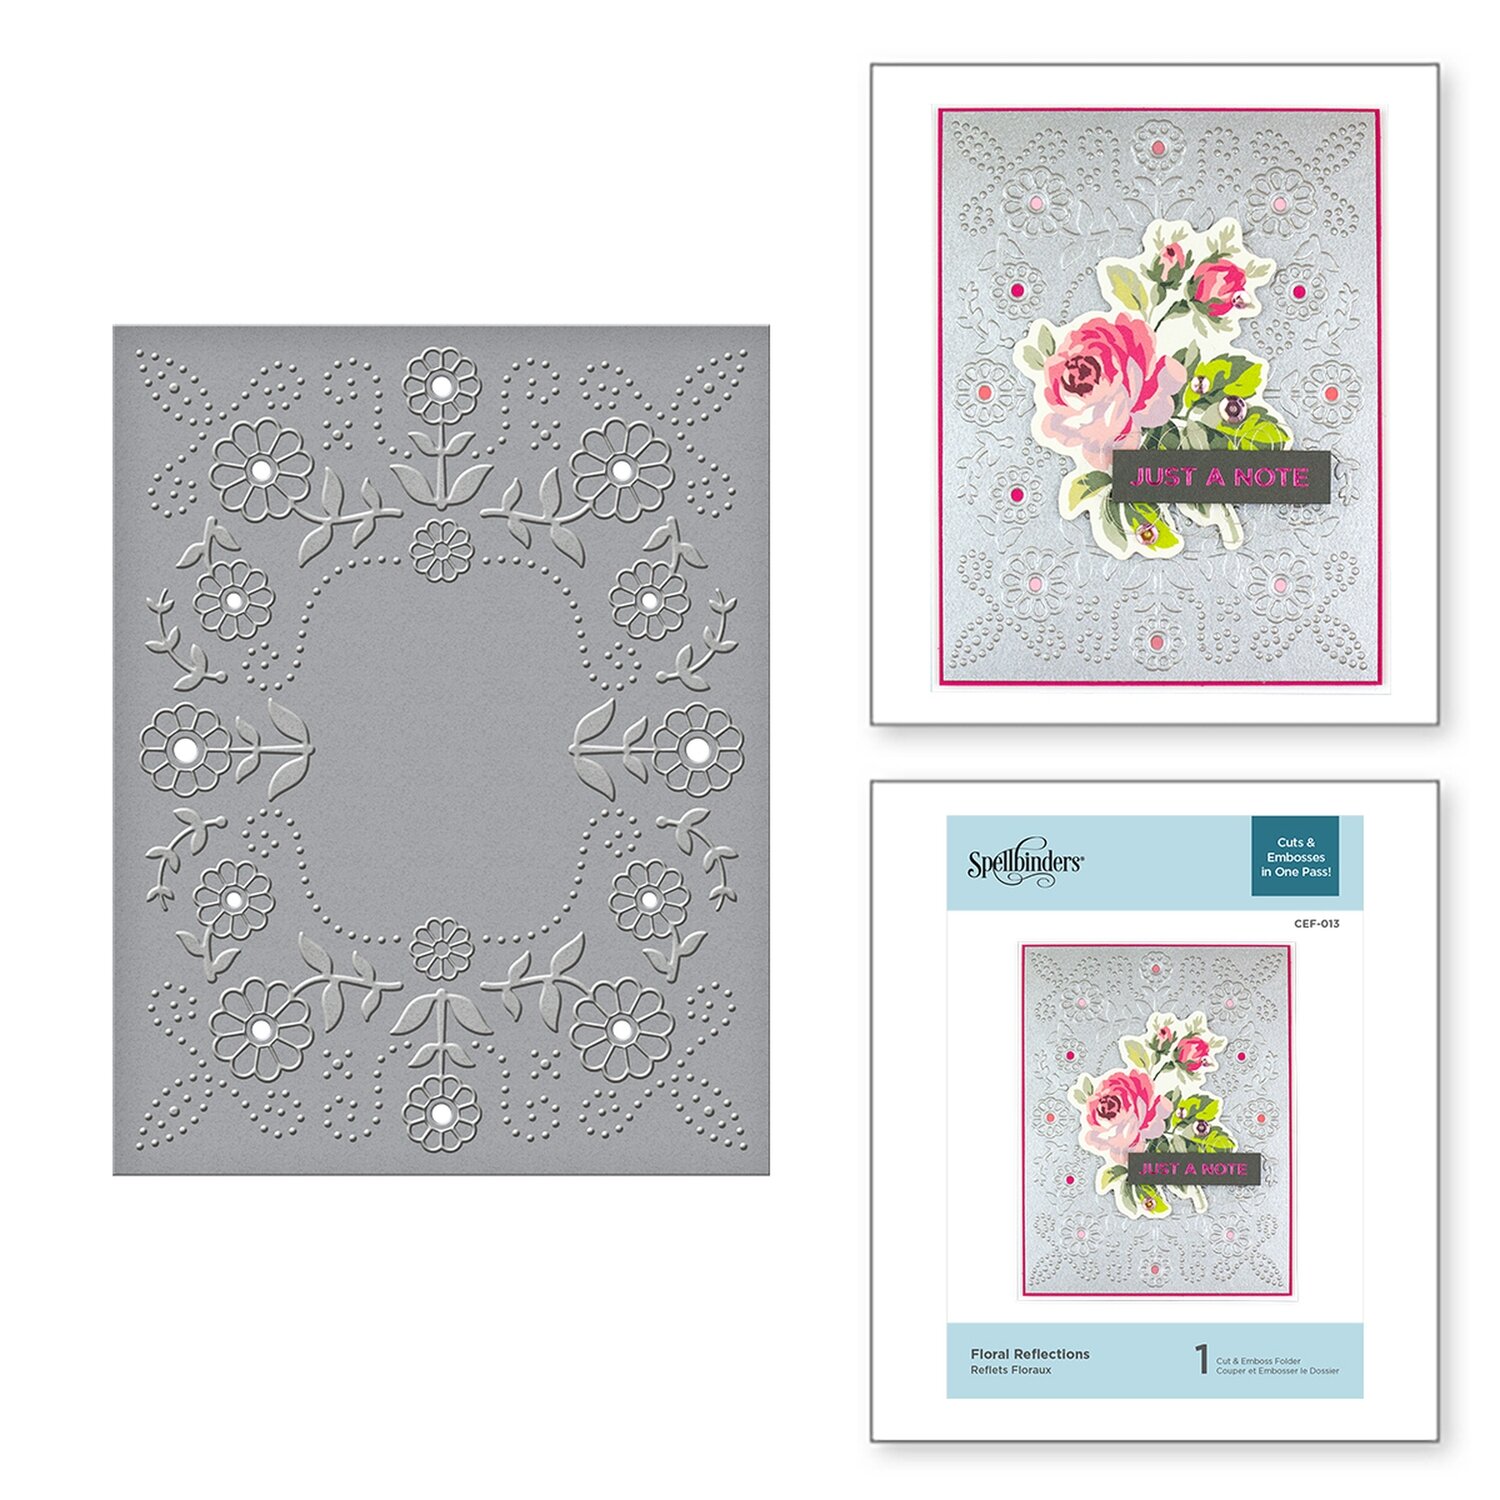 Spellbinders FLORAL REFLECTIONS Cut and Emboss Embossing Folder